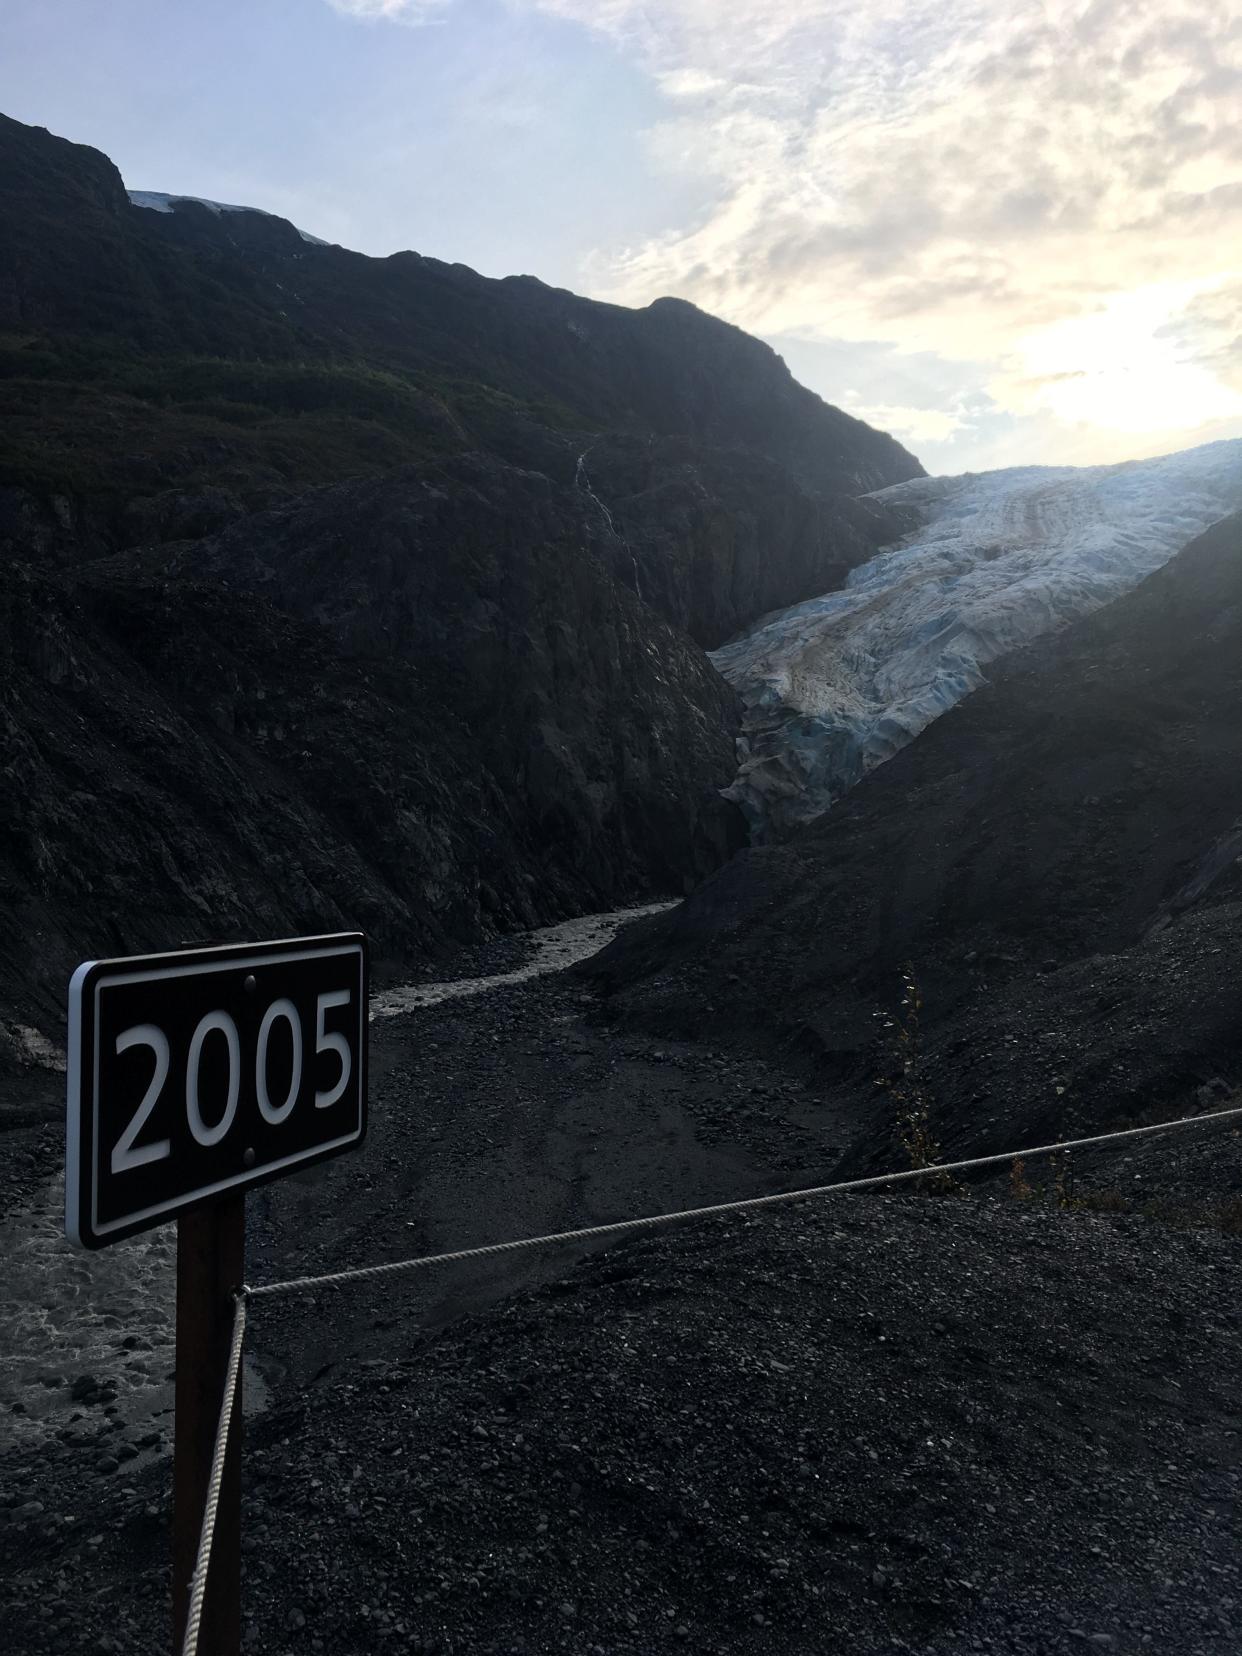 The toe of Exit Glacier taken from the 2005 sign on September 10th, 2019.